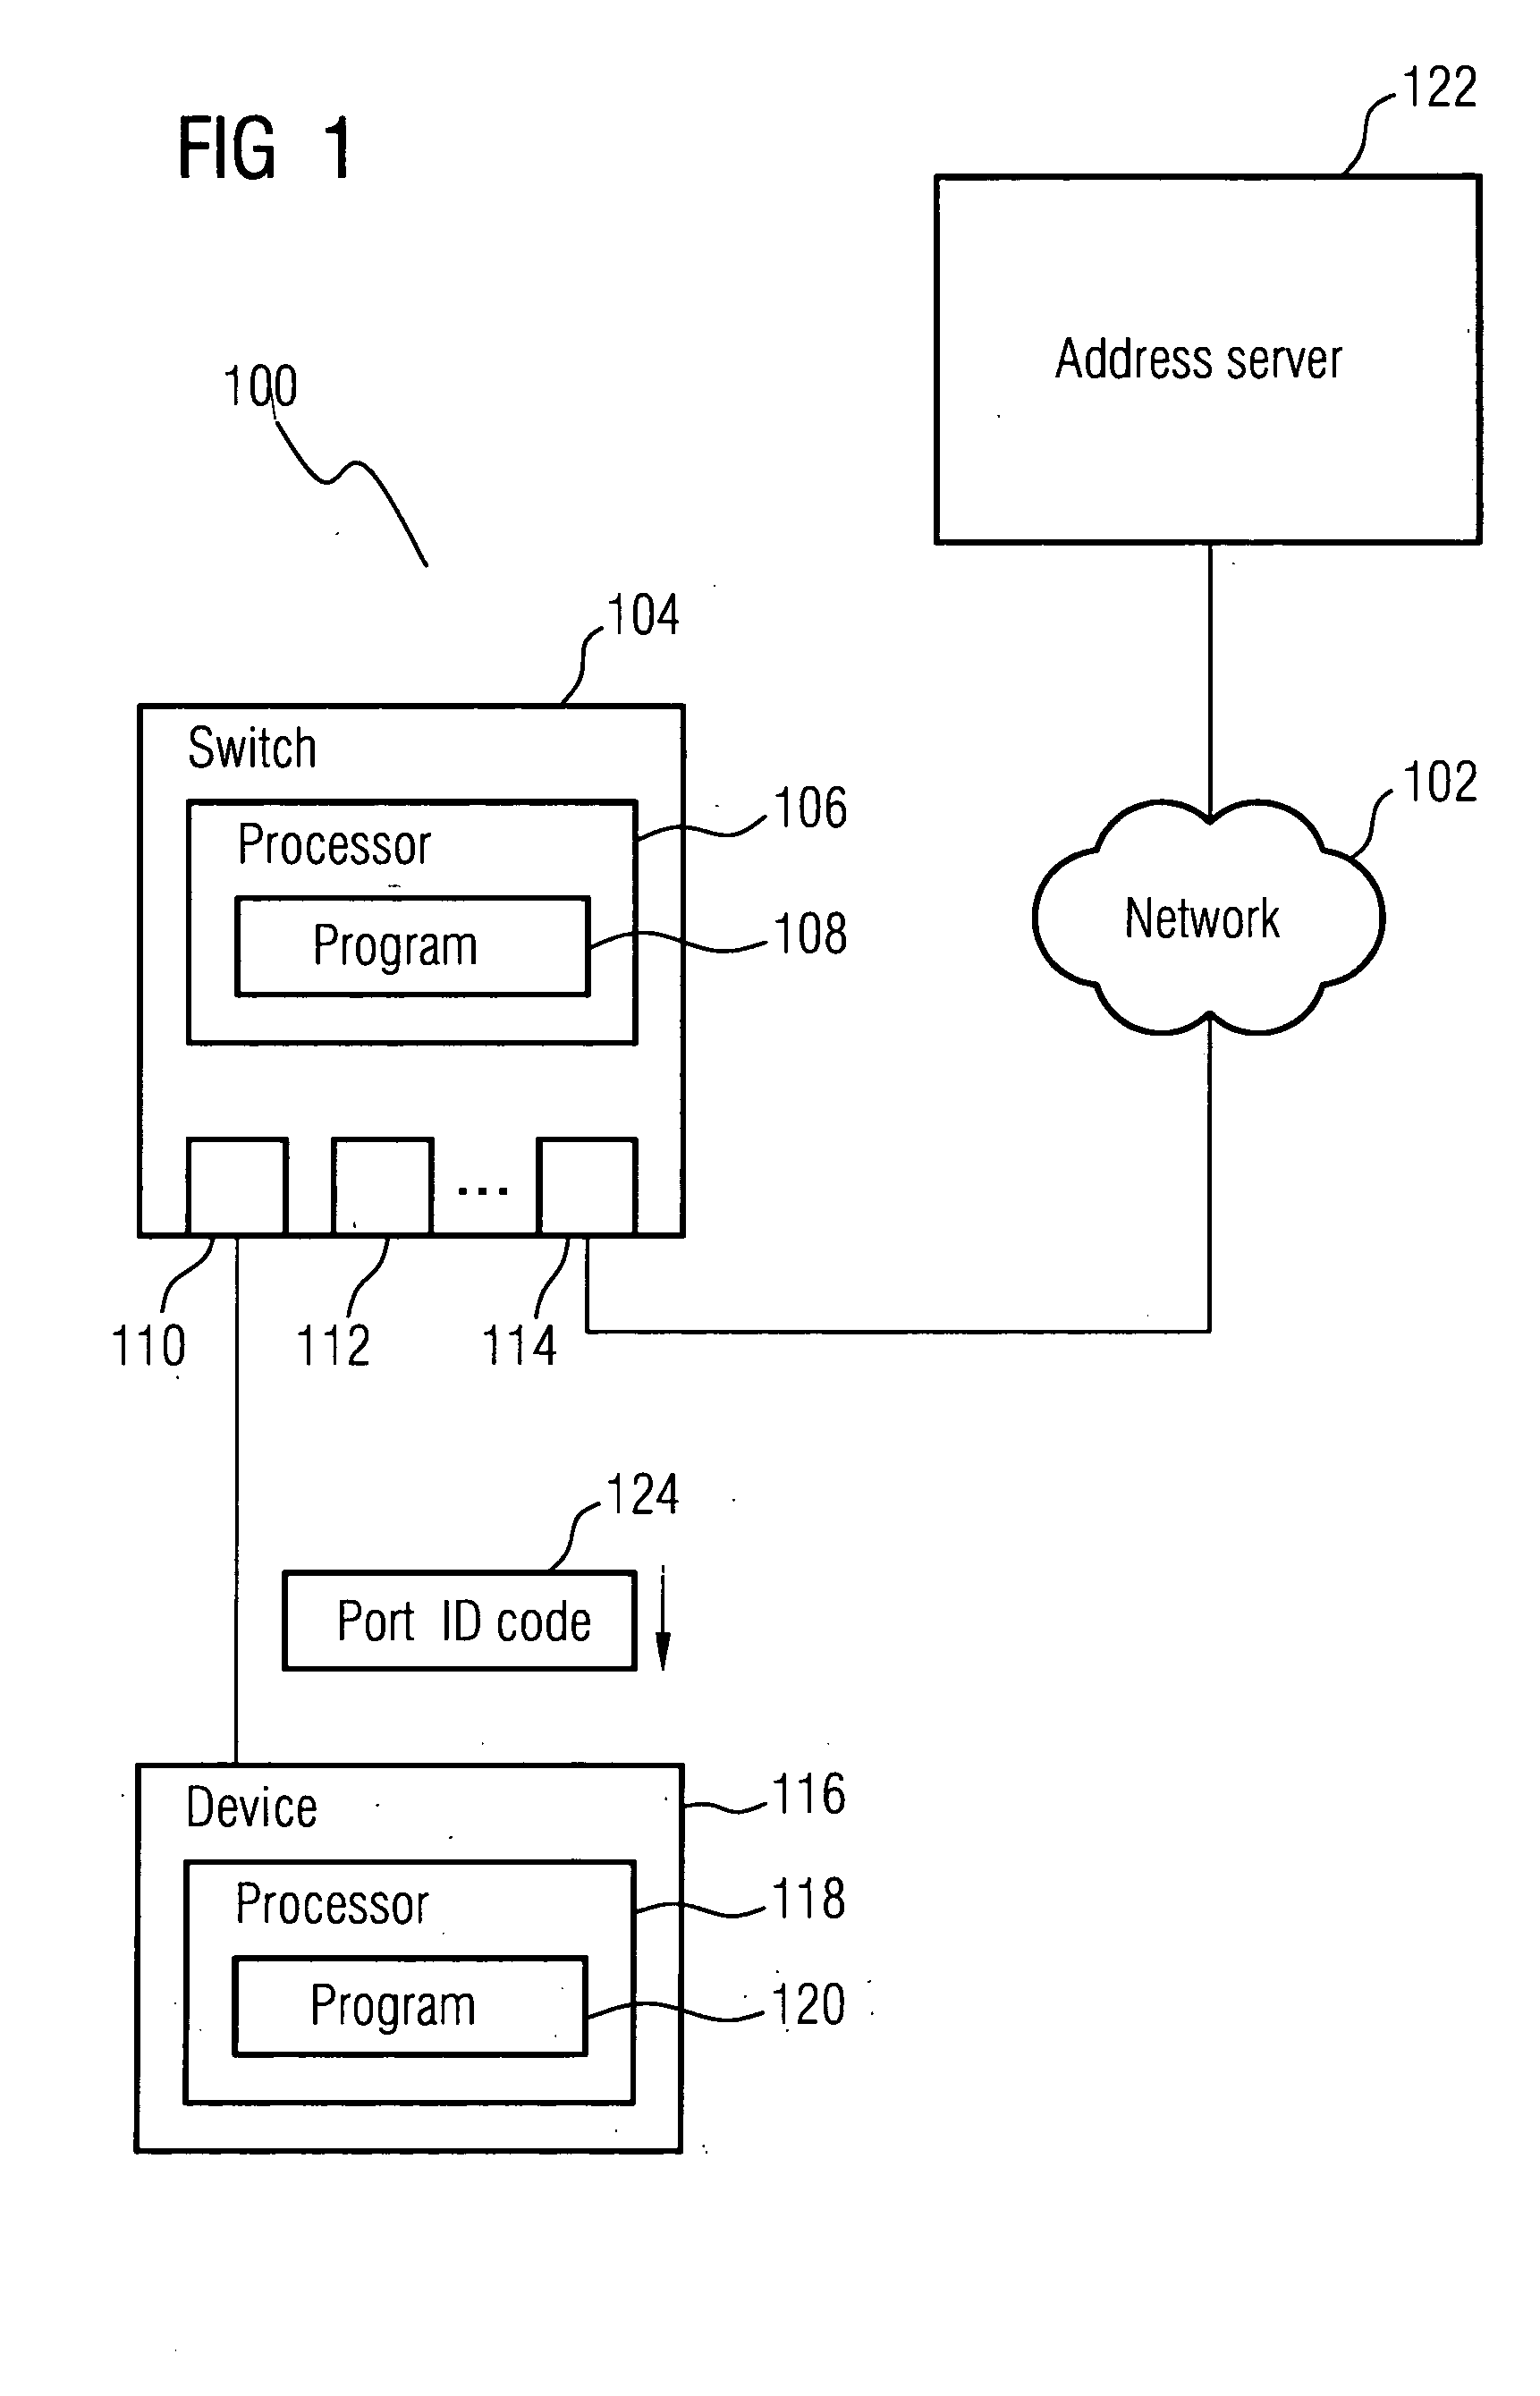 Method for assigning an IP address to a device